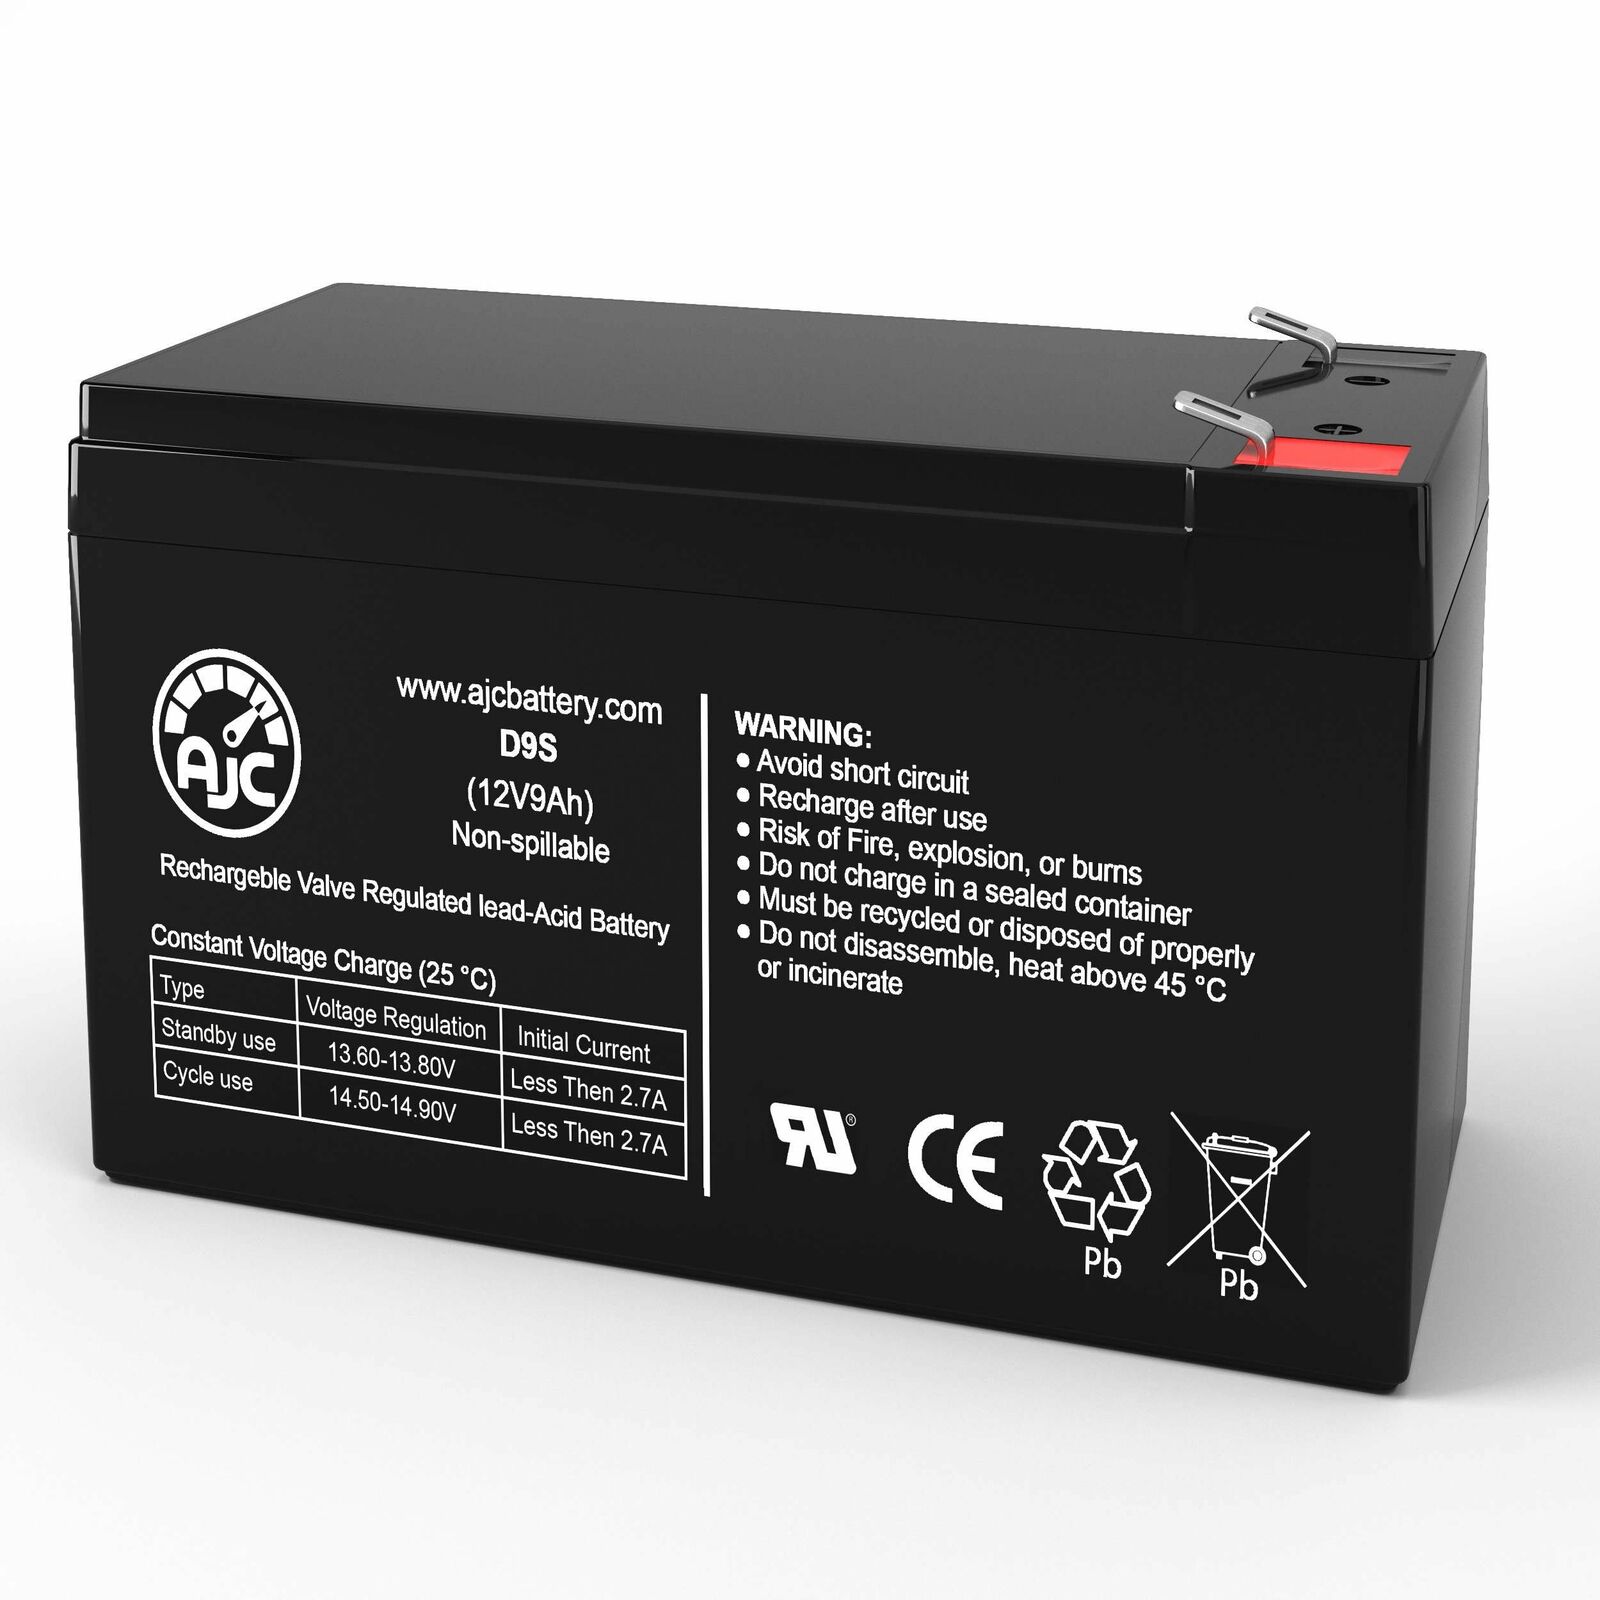 CyberPower Intelligent LCD CP1500AVRLCD 12V 9Ah UPS Replacement Battery